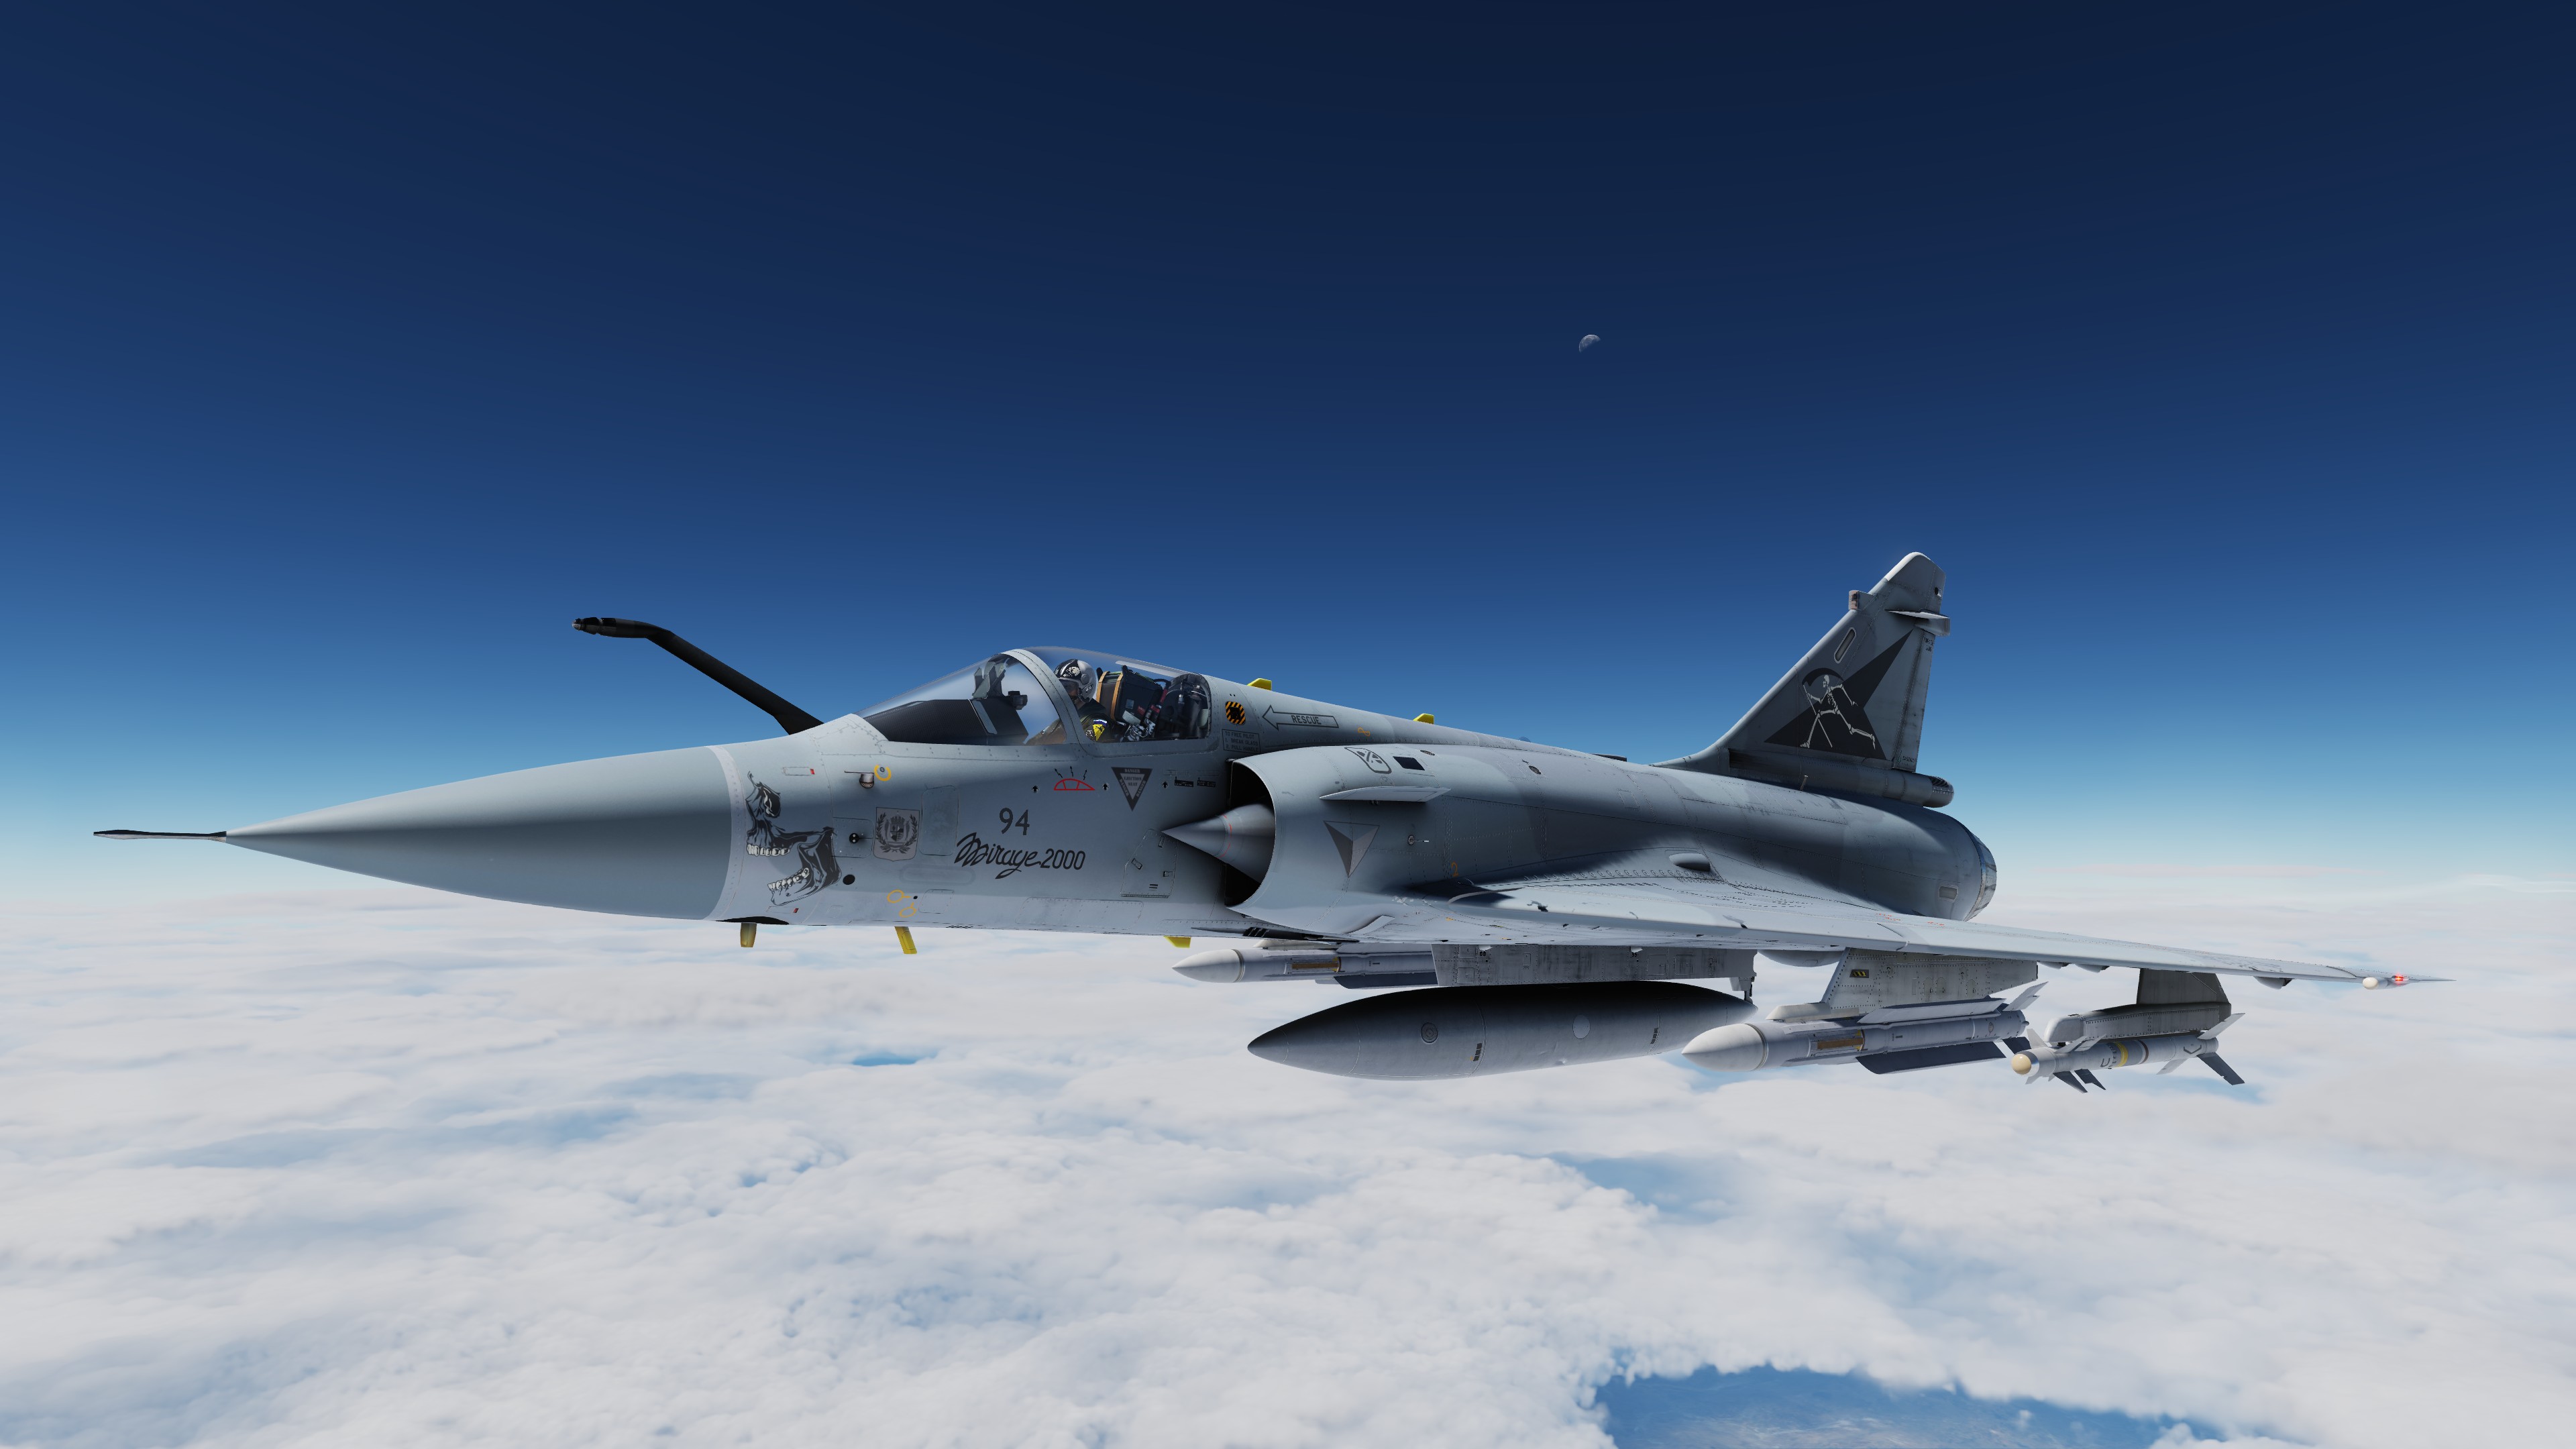 ACE COMBAT - M2000C - Nordennavic Royal Air Force - Sqn "Cote d'Or" V1.22 SPA94 with Skull